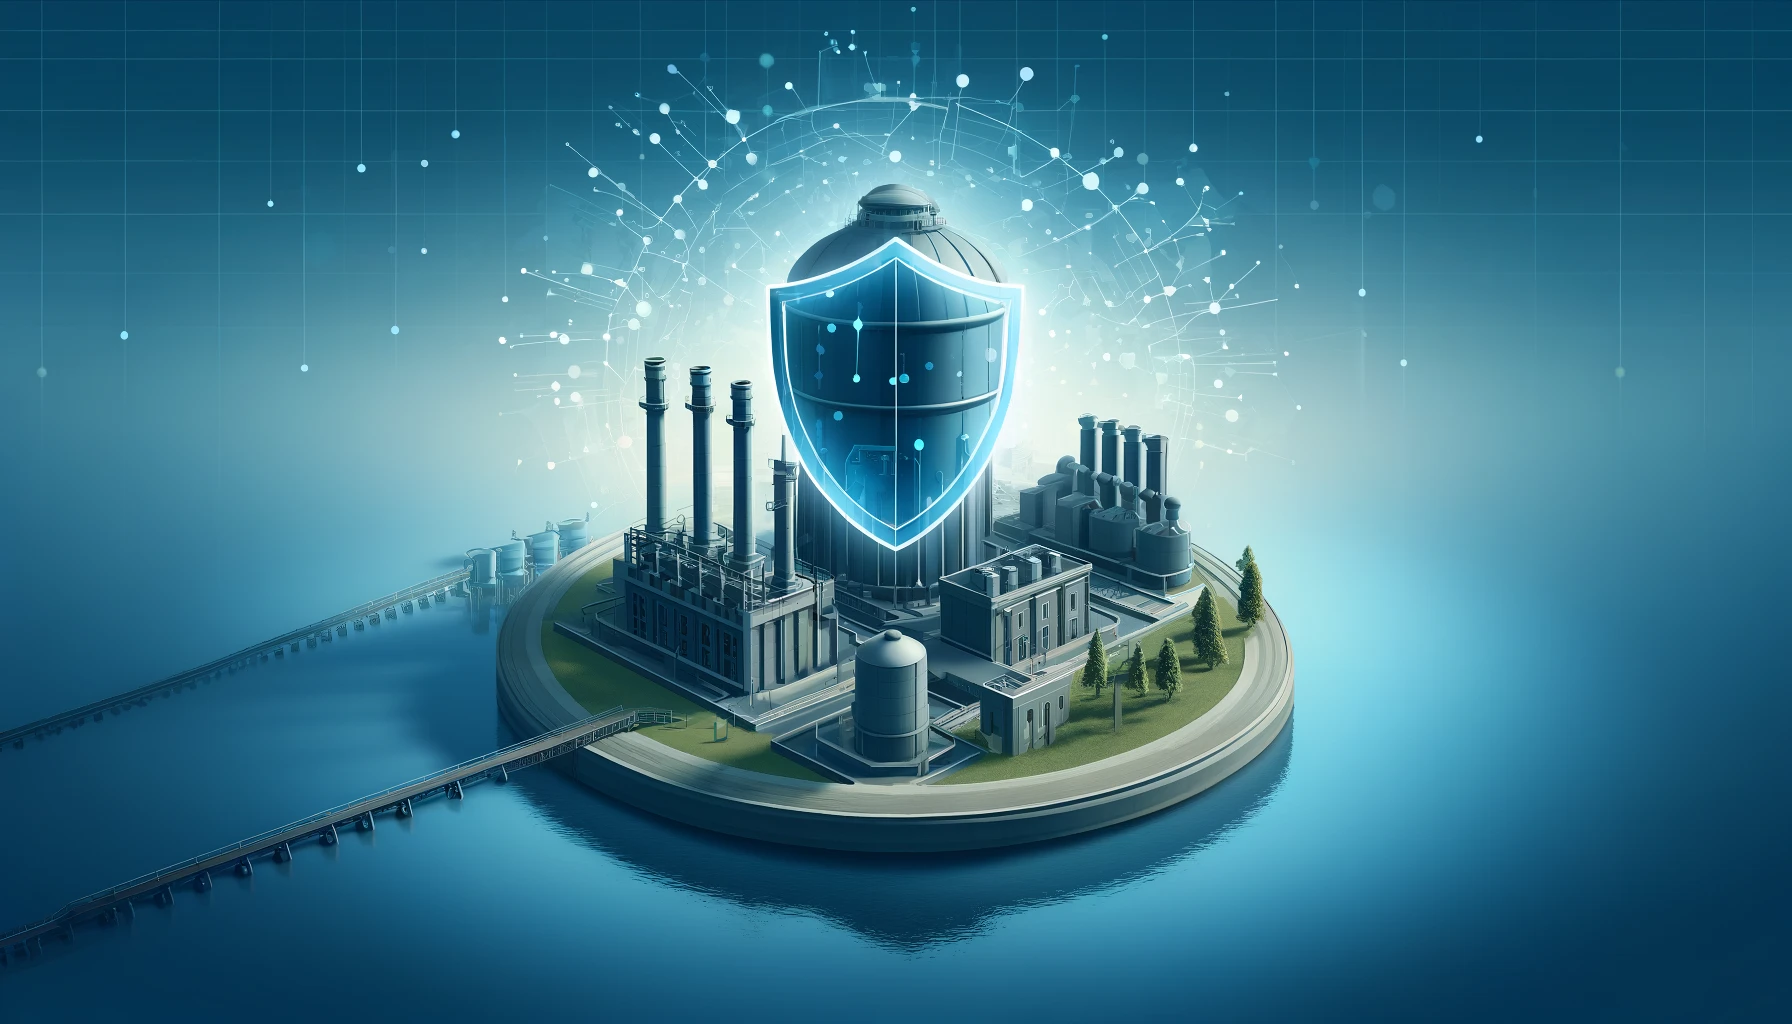 Digital illustration of a water facility protected by Datafying Tech Services' cyber security shield, symbolizing advanced defenses against cyber threats.